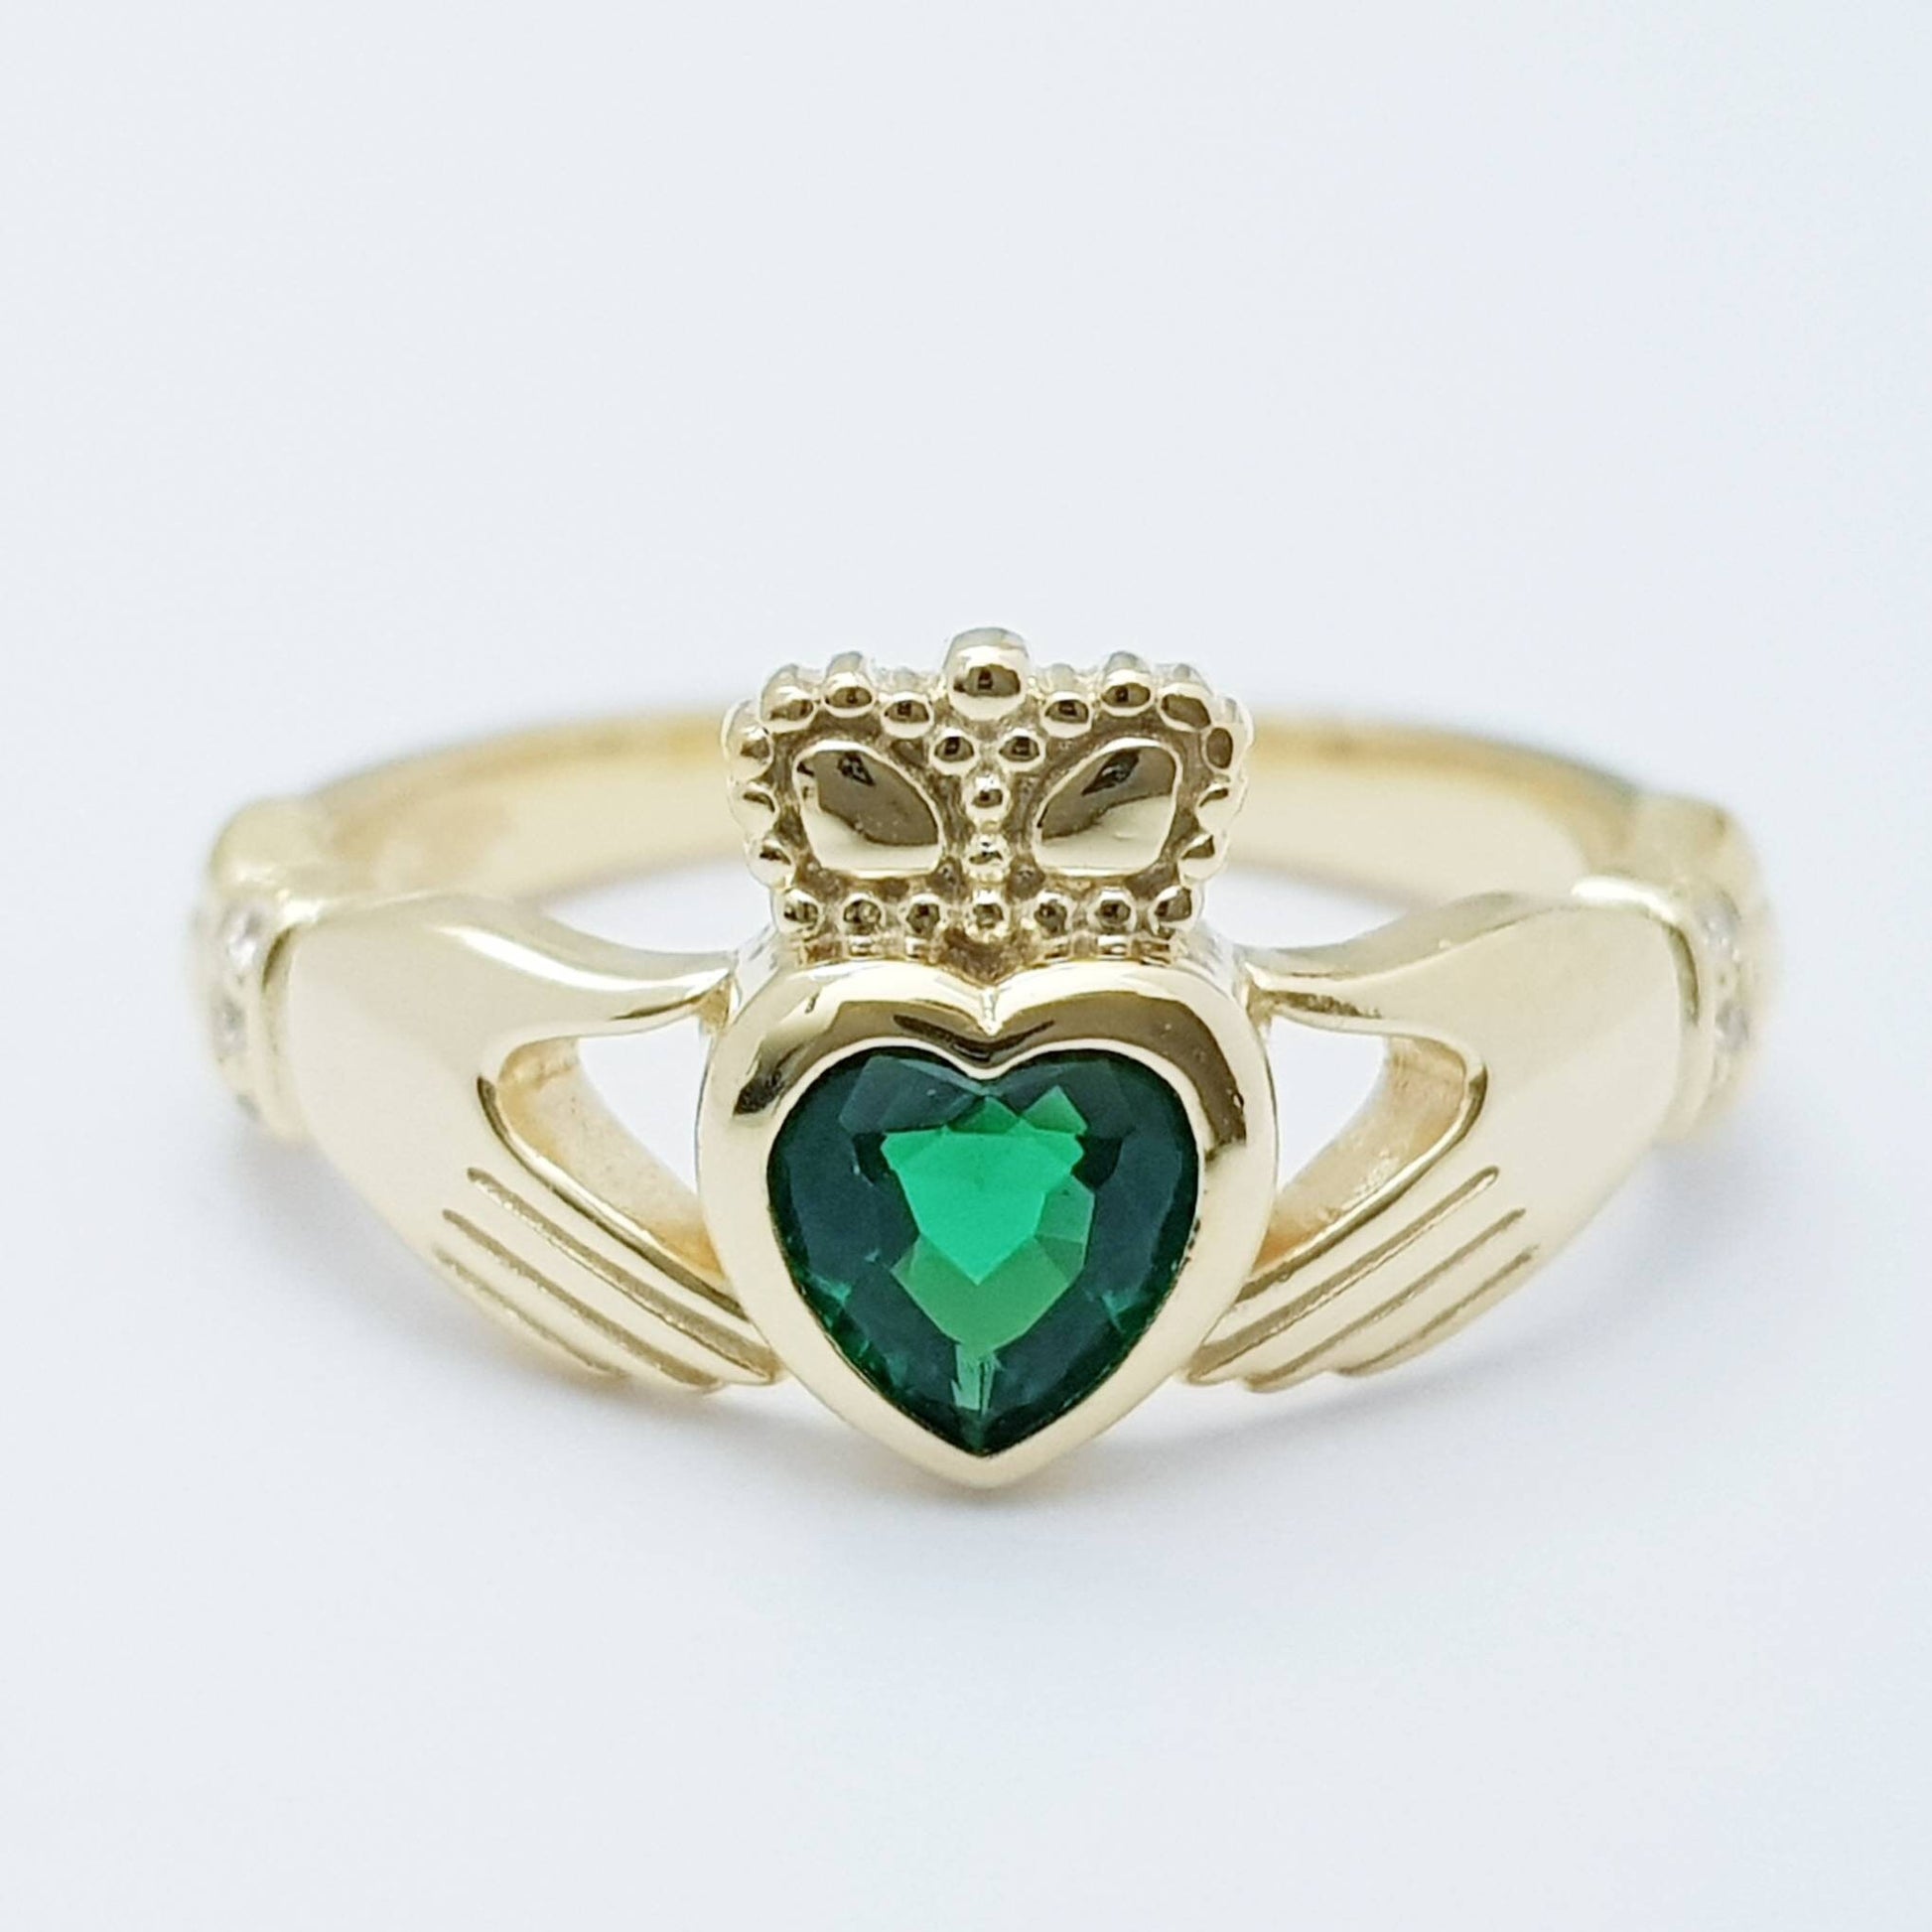 Sterling Silver Yellow Gold plated Claddagh ring set with emerald green heart shaped stone, may birthstone claddagh ring from Ireland